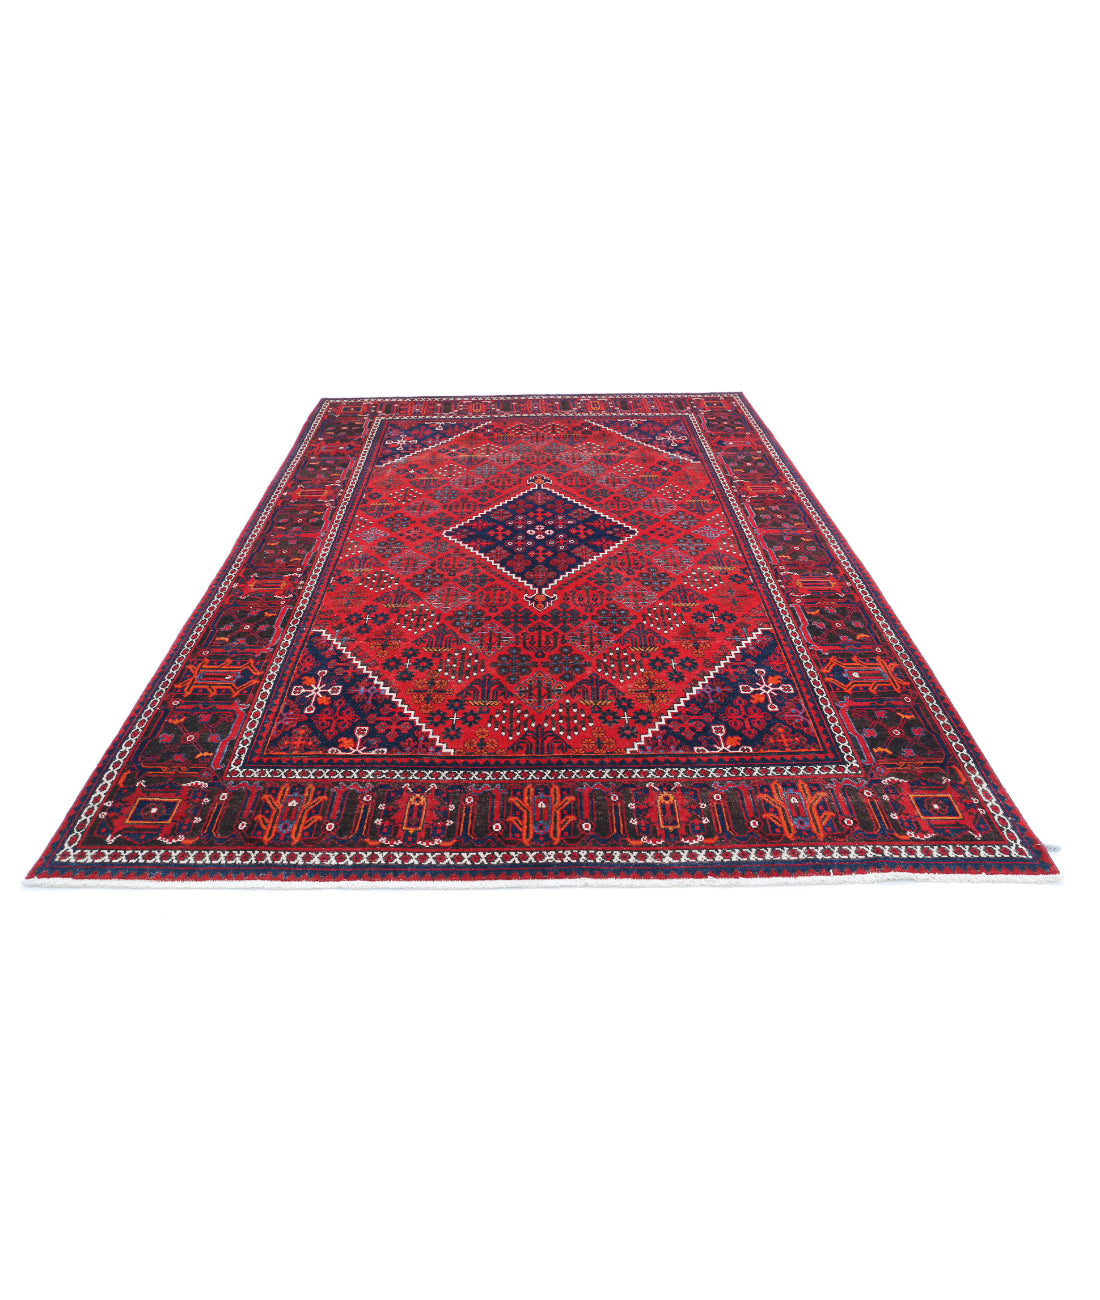 Hand Knotted Persian Josheghan Wool Rug - 7'0'' x 10'7'' 7'0'' x 10'7'' (210 X 318) / Red / Ivory